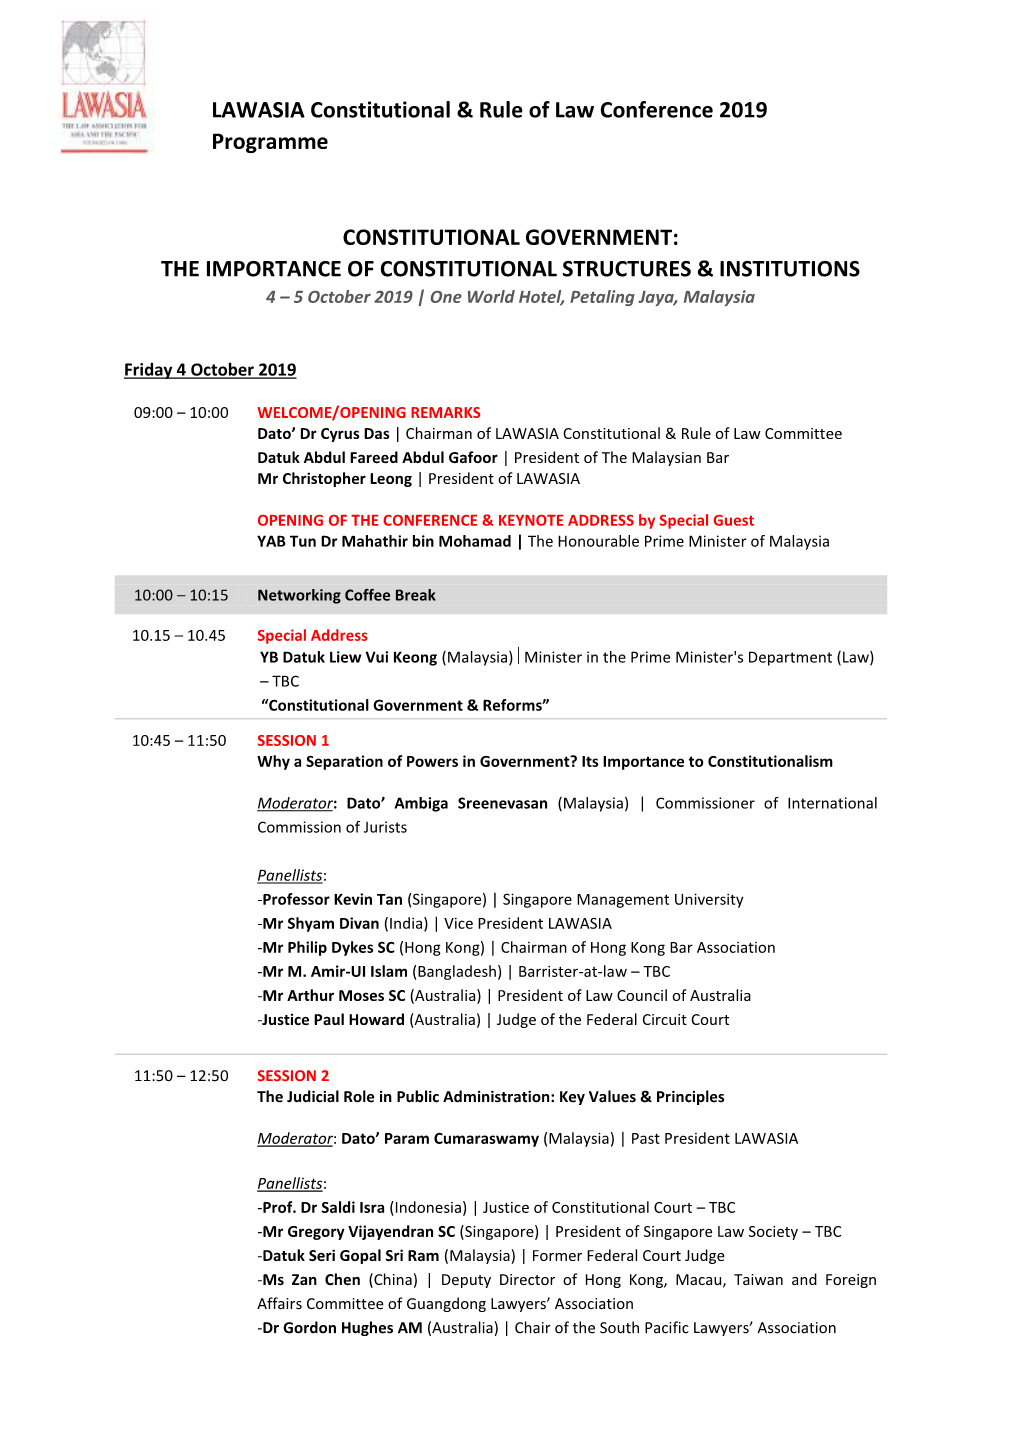 LAWASIA Constitutional & Rule of Law Conference 2019 Programme